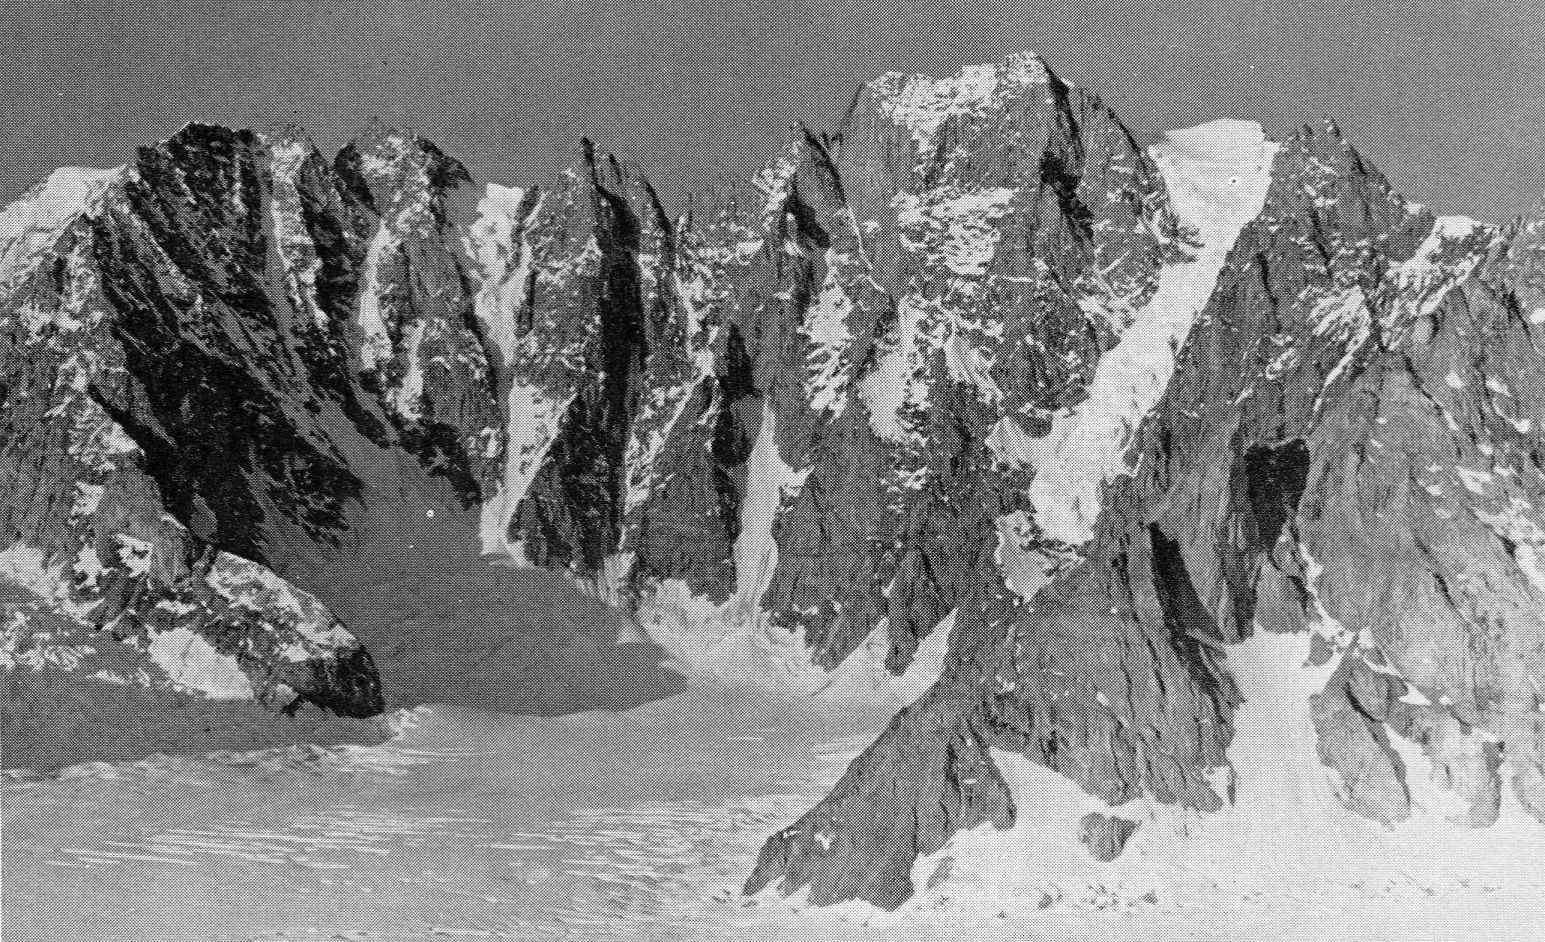 North Face of Berserkertinde in the  Staunings Alps in Greenland